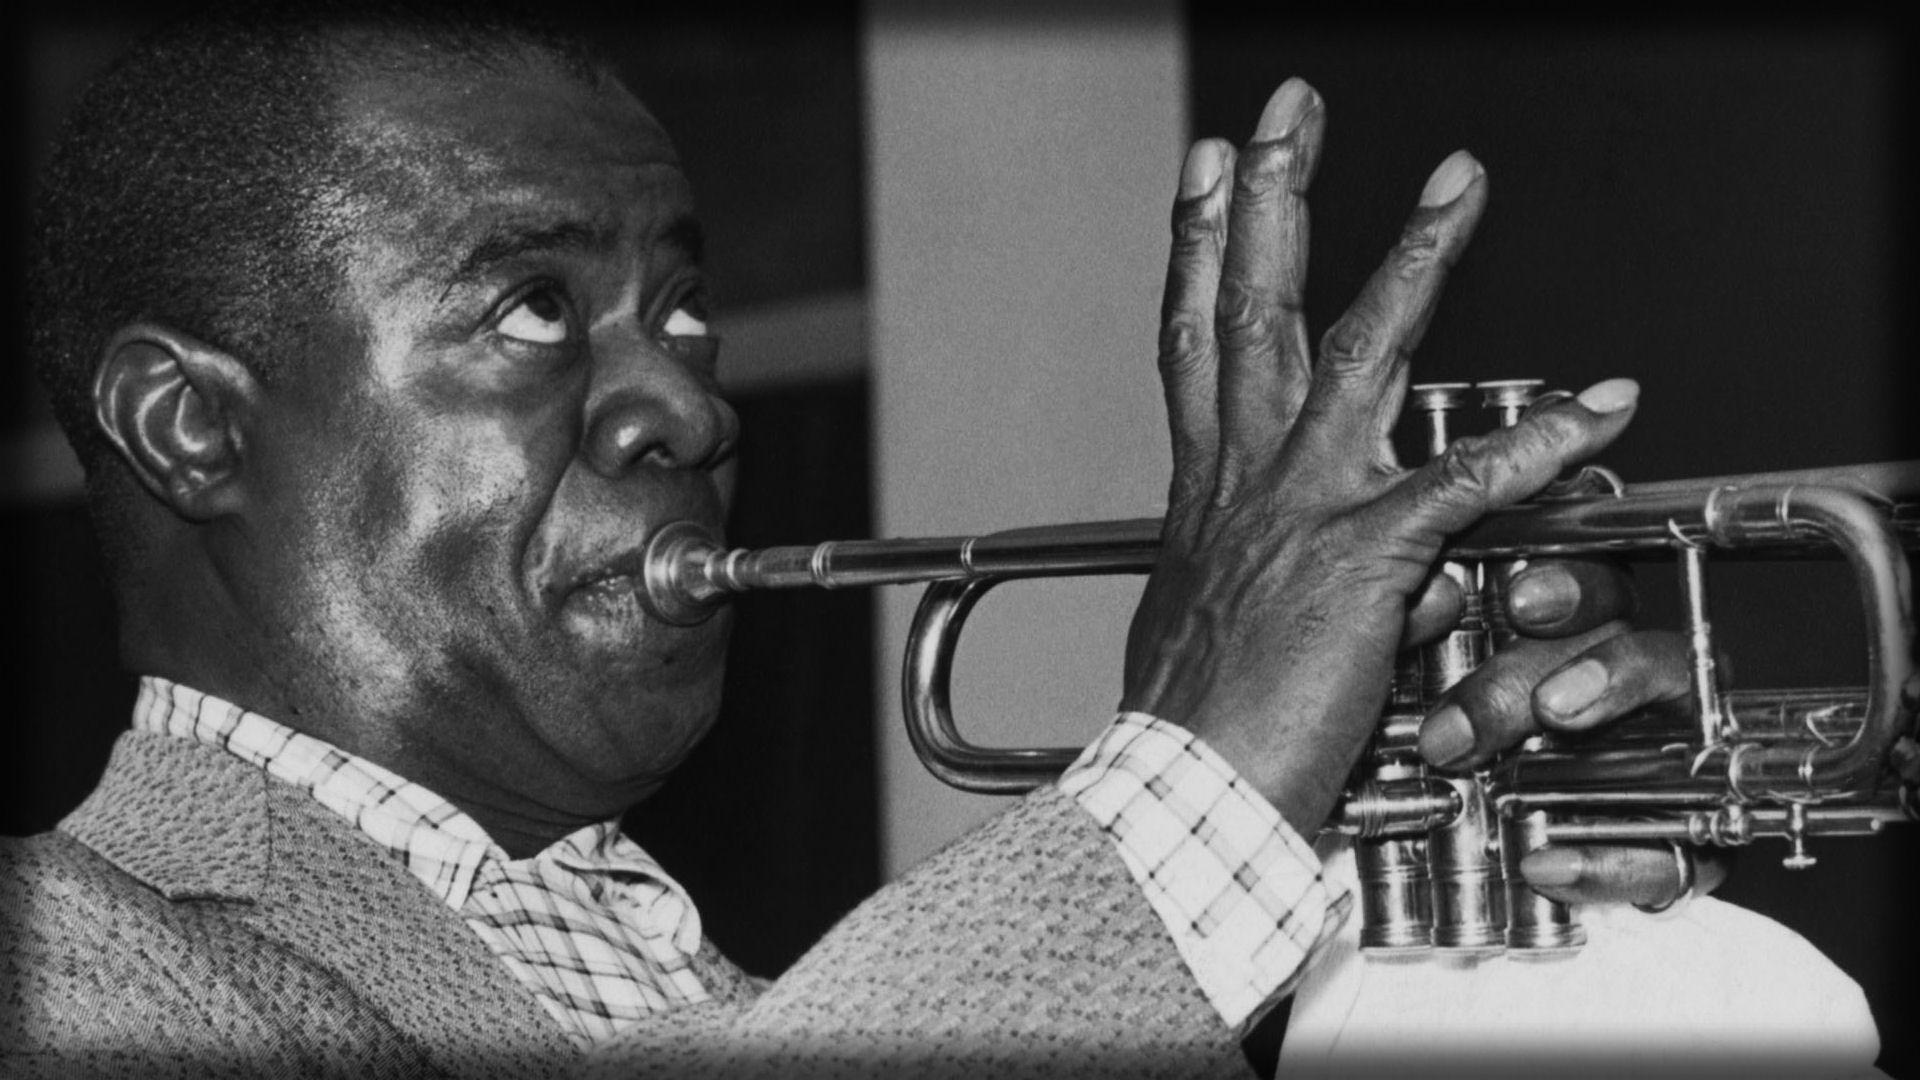 Download Wallpaper 1920x1080 louis armstrong, pipe, eyes, fingers